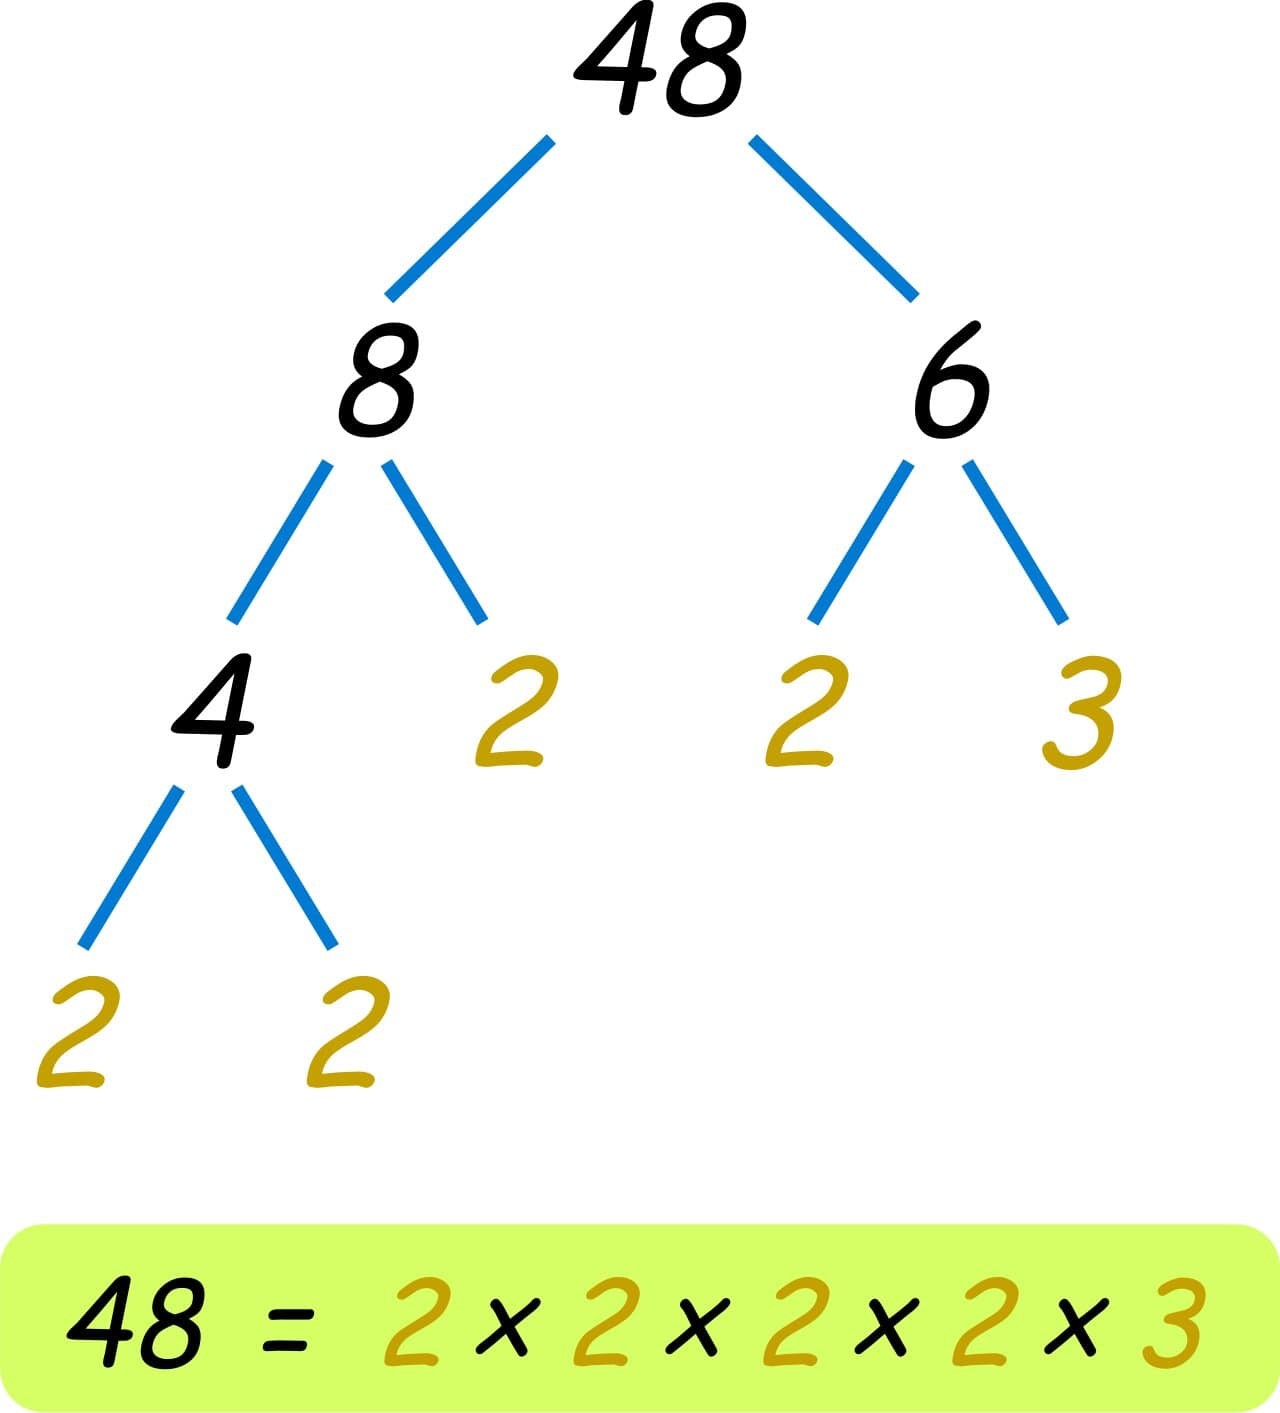 a factor tree of the number 48